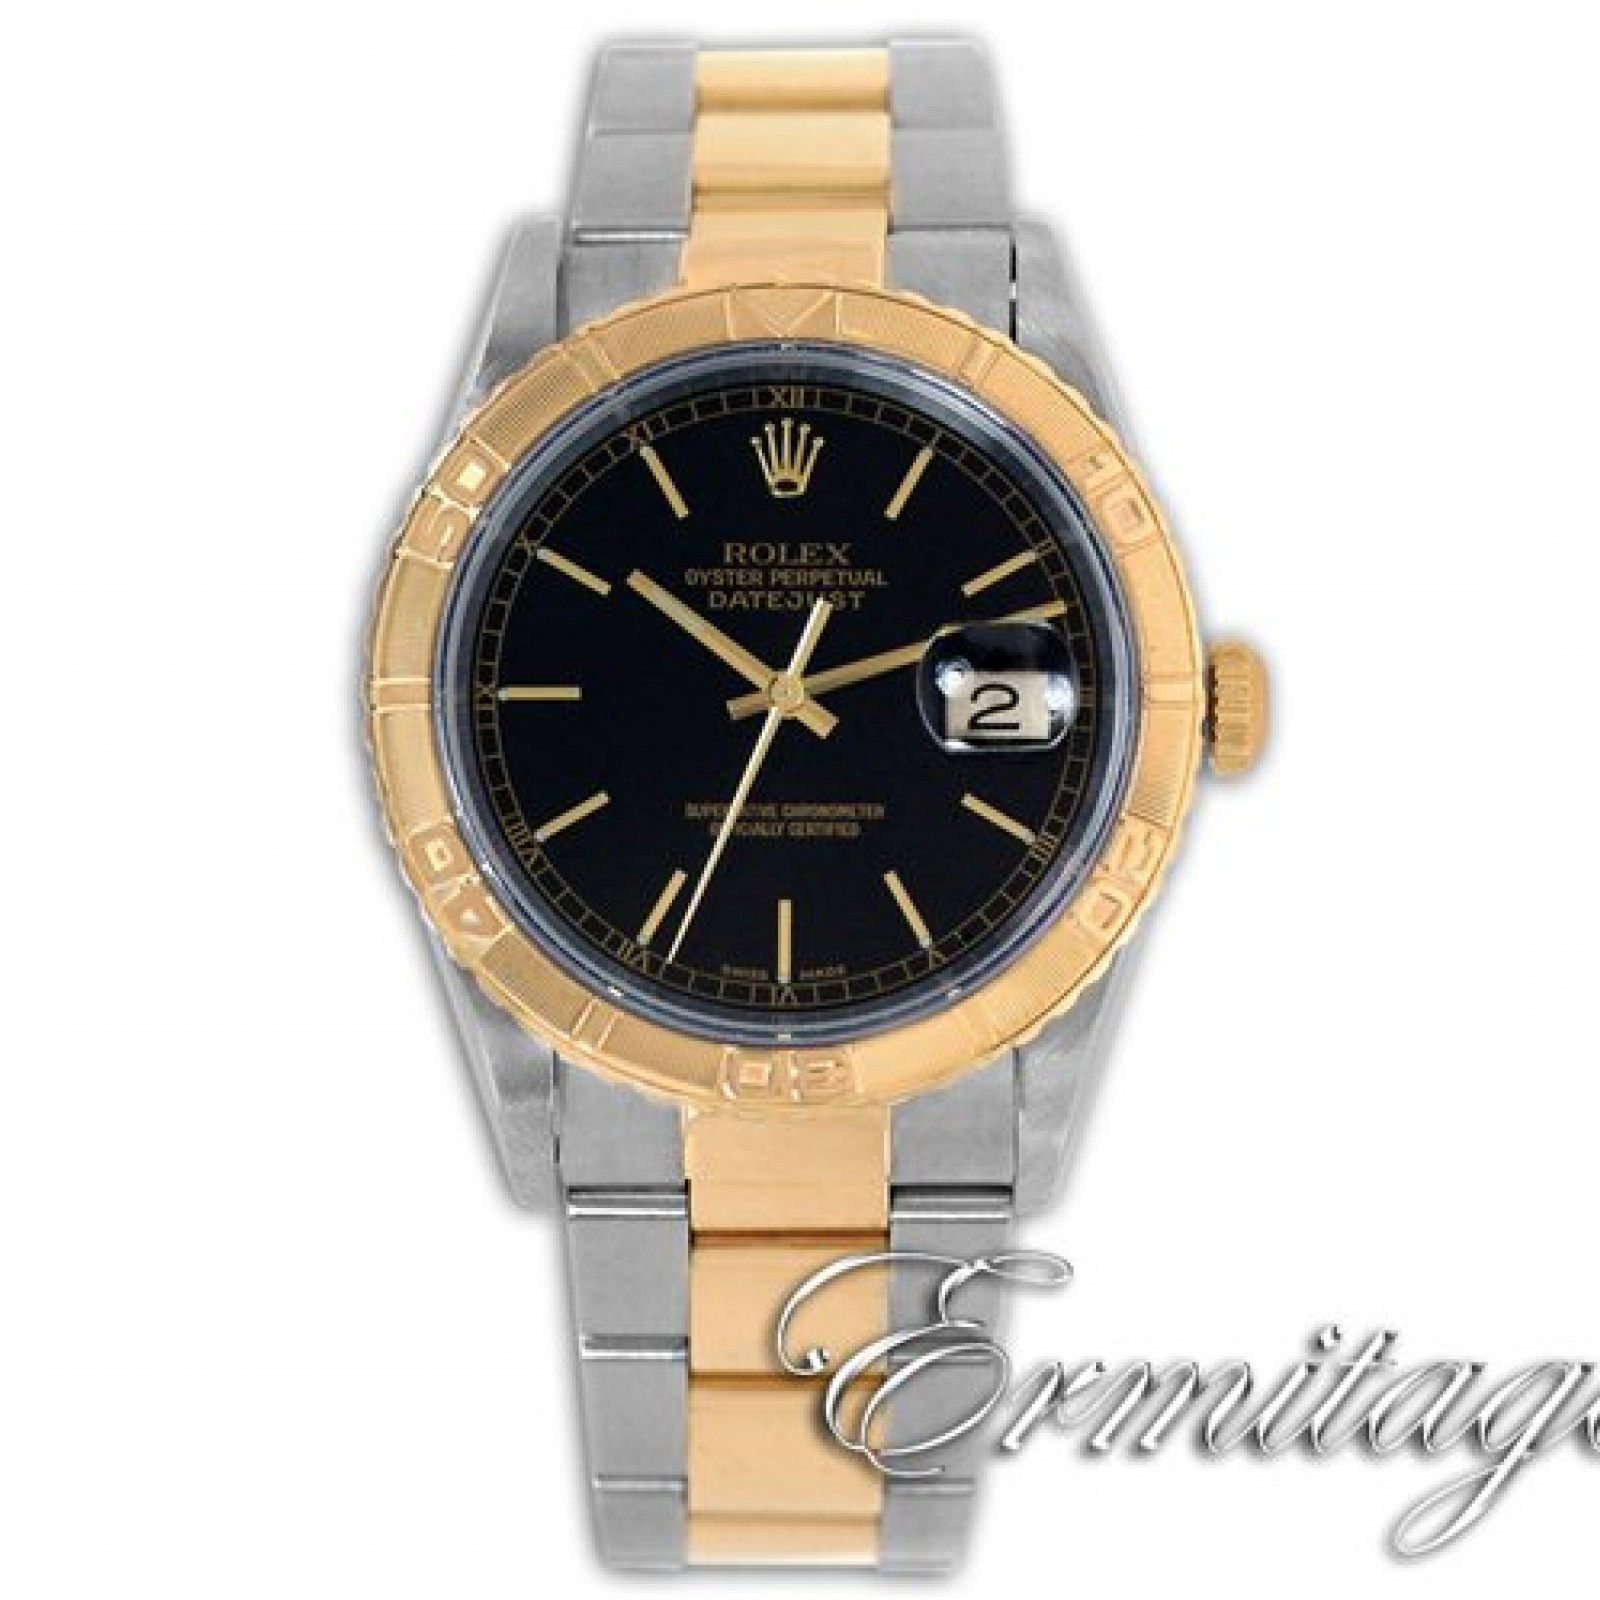 Rolex Men's Oyster Perpetual Datejust Turn-O-Graph 16263